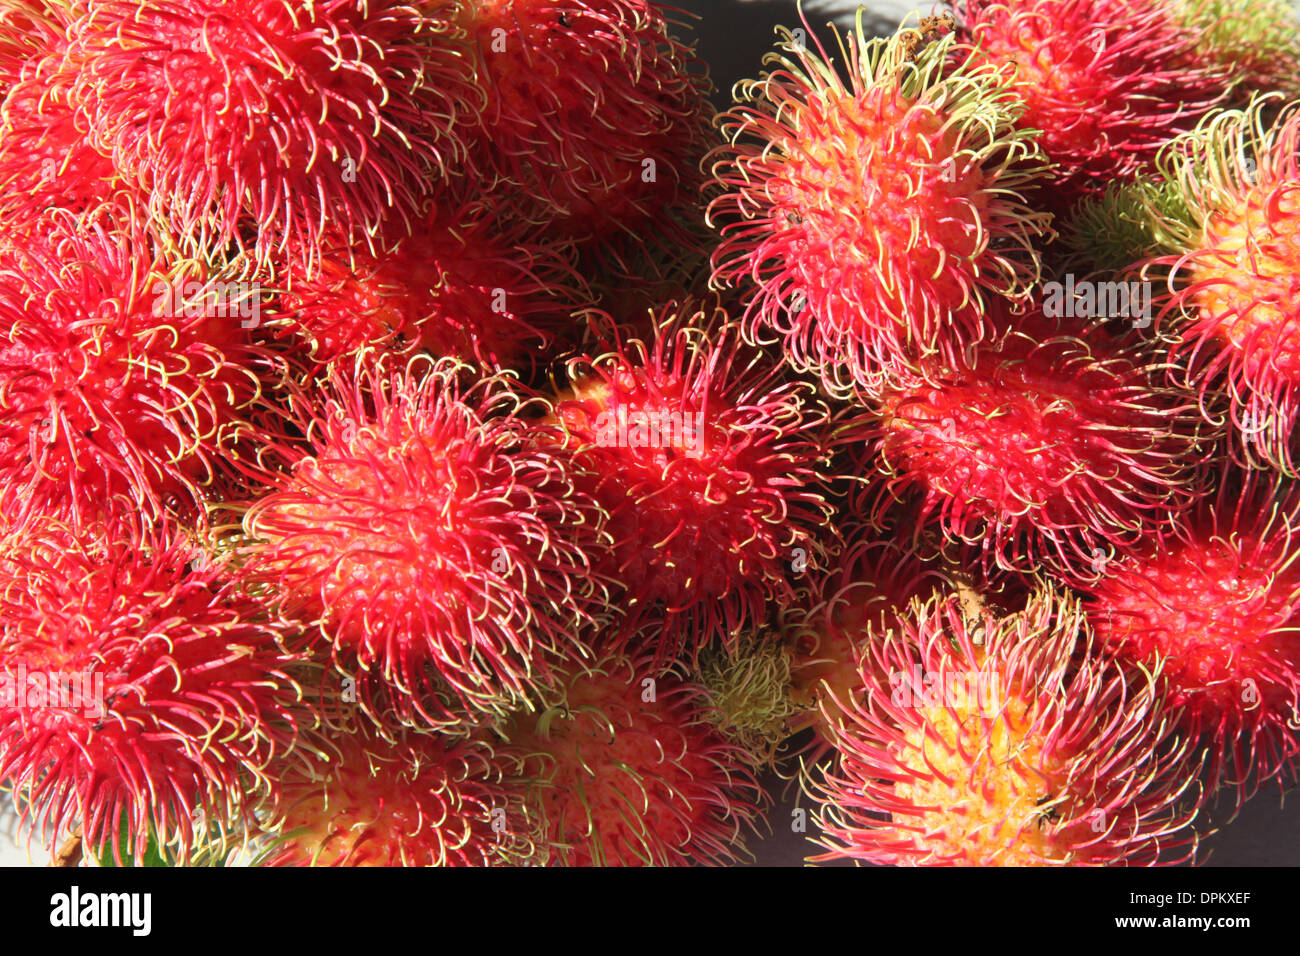 The hairy red and yellow Rambutan in close-up Stock Photo